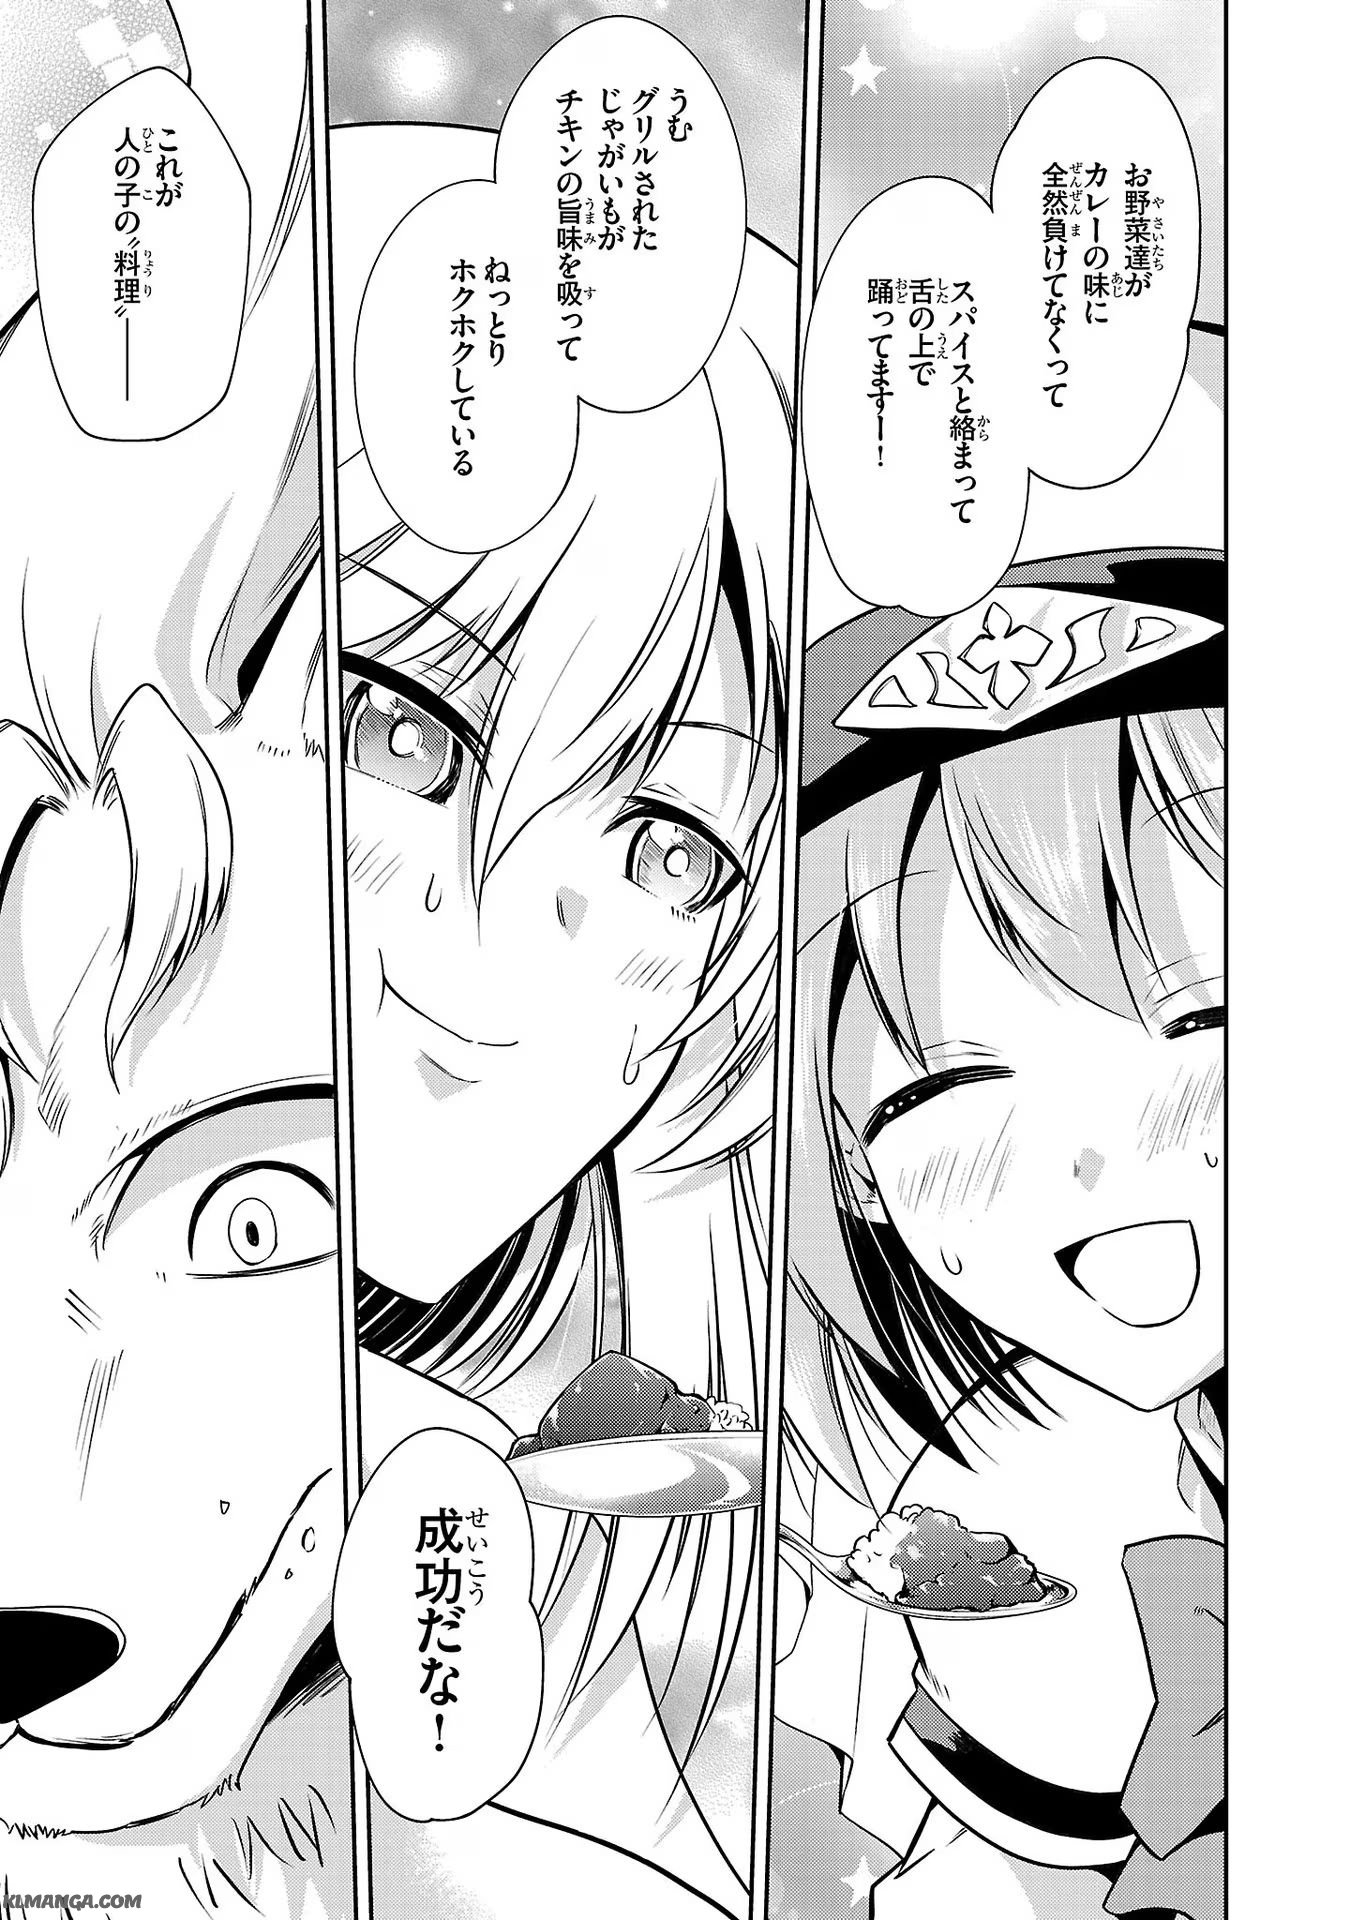 Hungry Saint and Full-Stomach Witch’s Slow Life in Another World! 腹ペコ聖女とまんぷく魔女の異世界スローライフ! 第13話 - Page 5